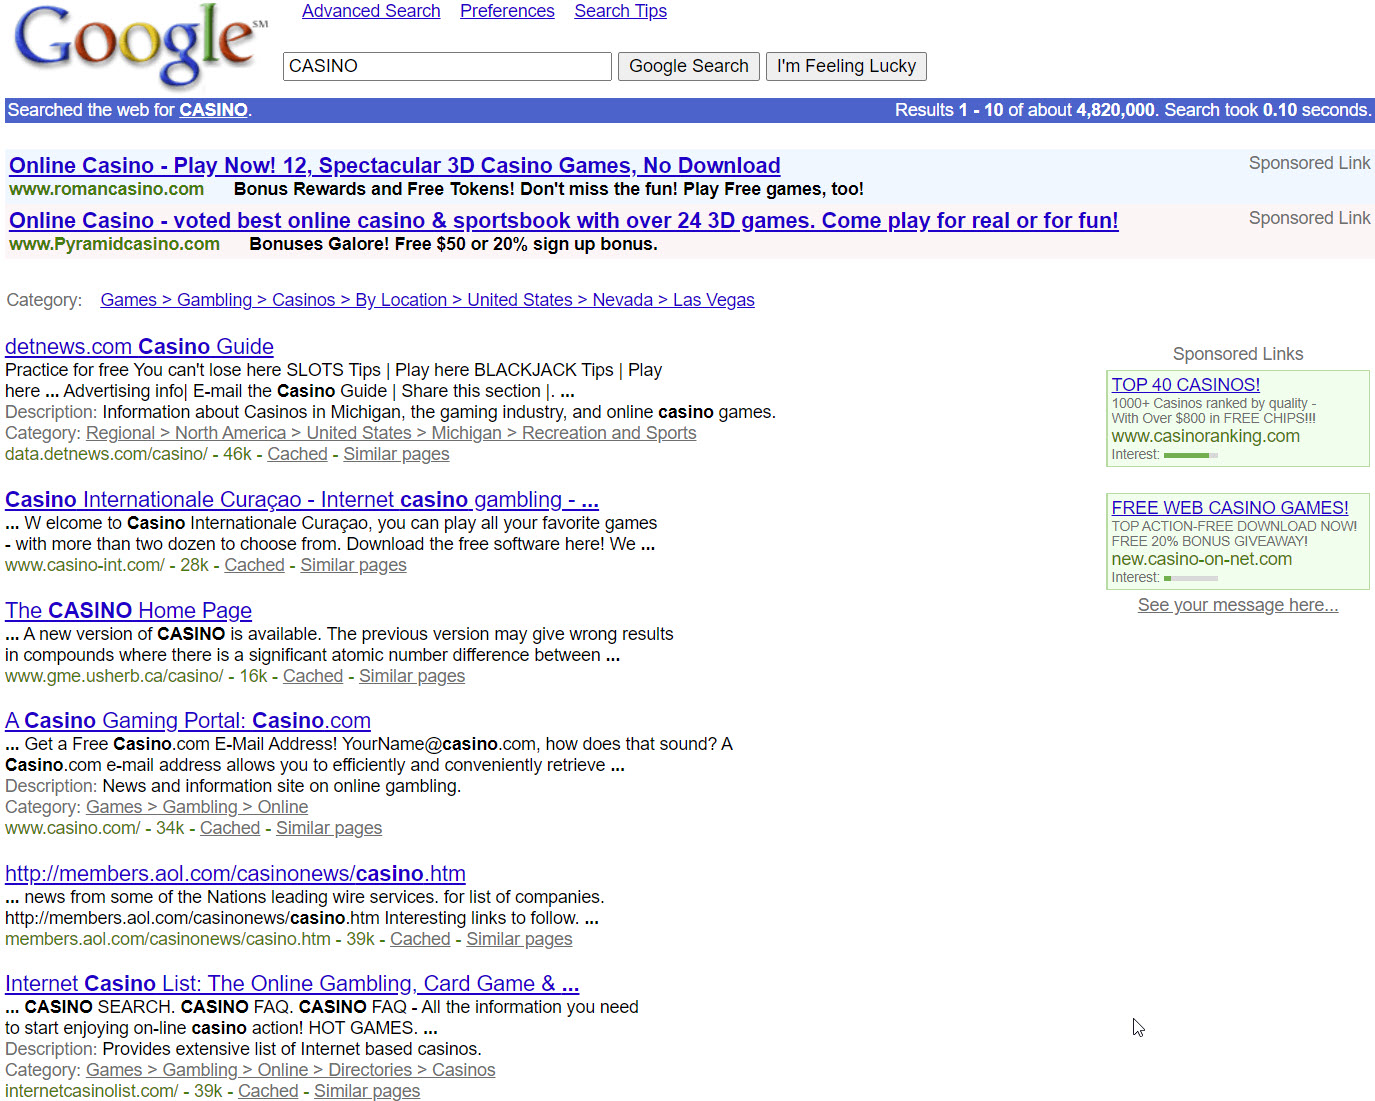 2001 Google search results with clear ad labeling and small ad units.